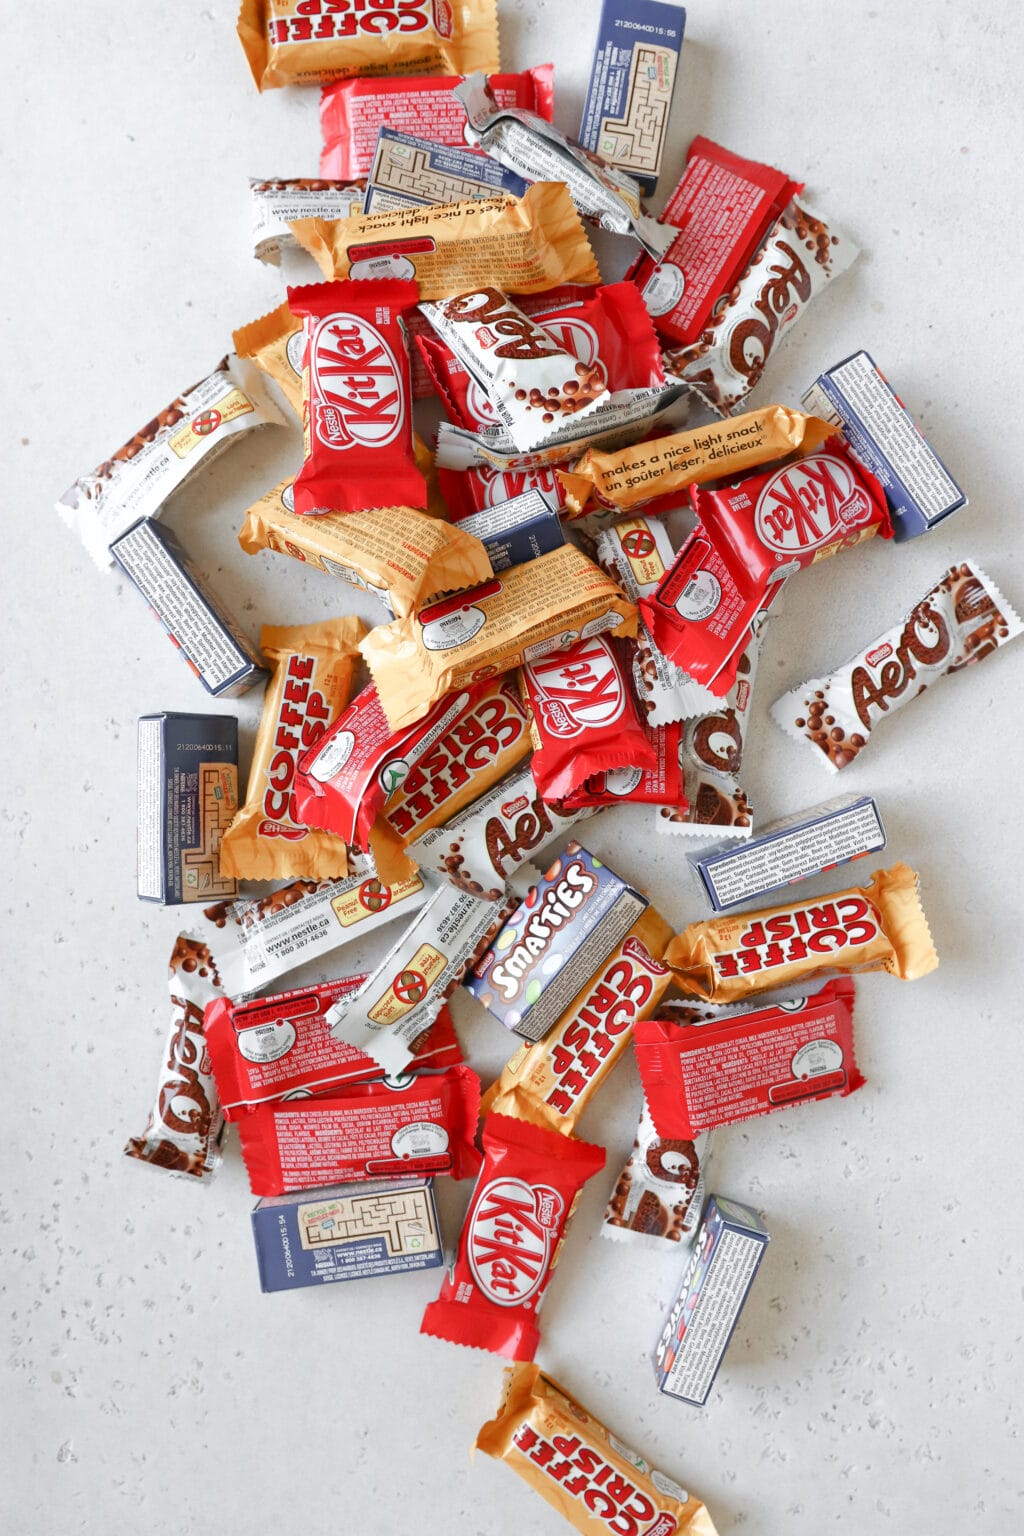 There's a pile of halloween size candy on the counter. The candies include aeros, kitkats, coffee crisps and smarties.